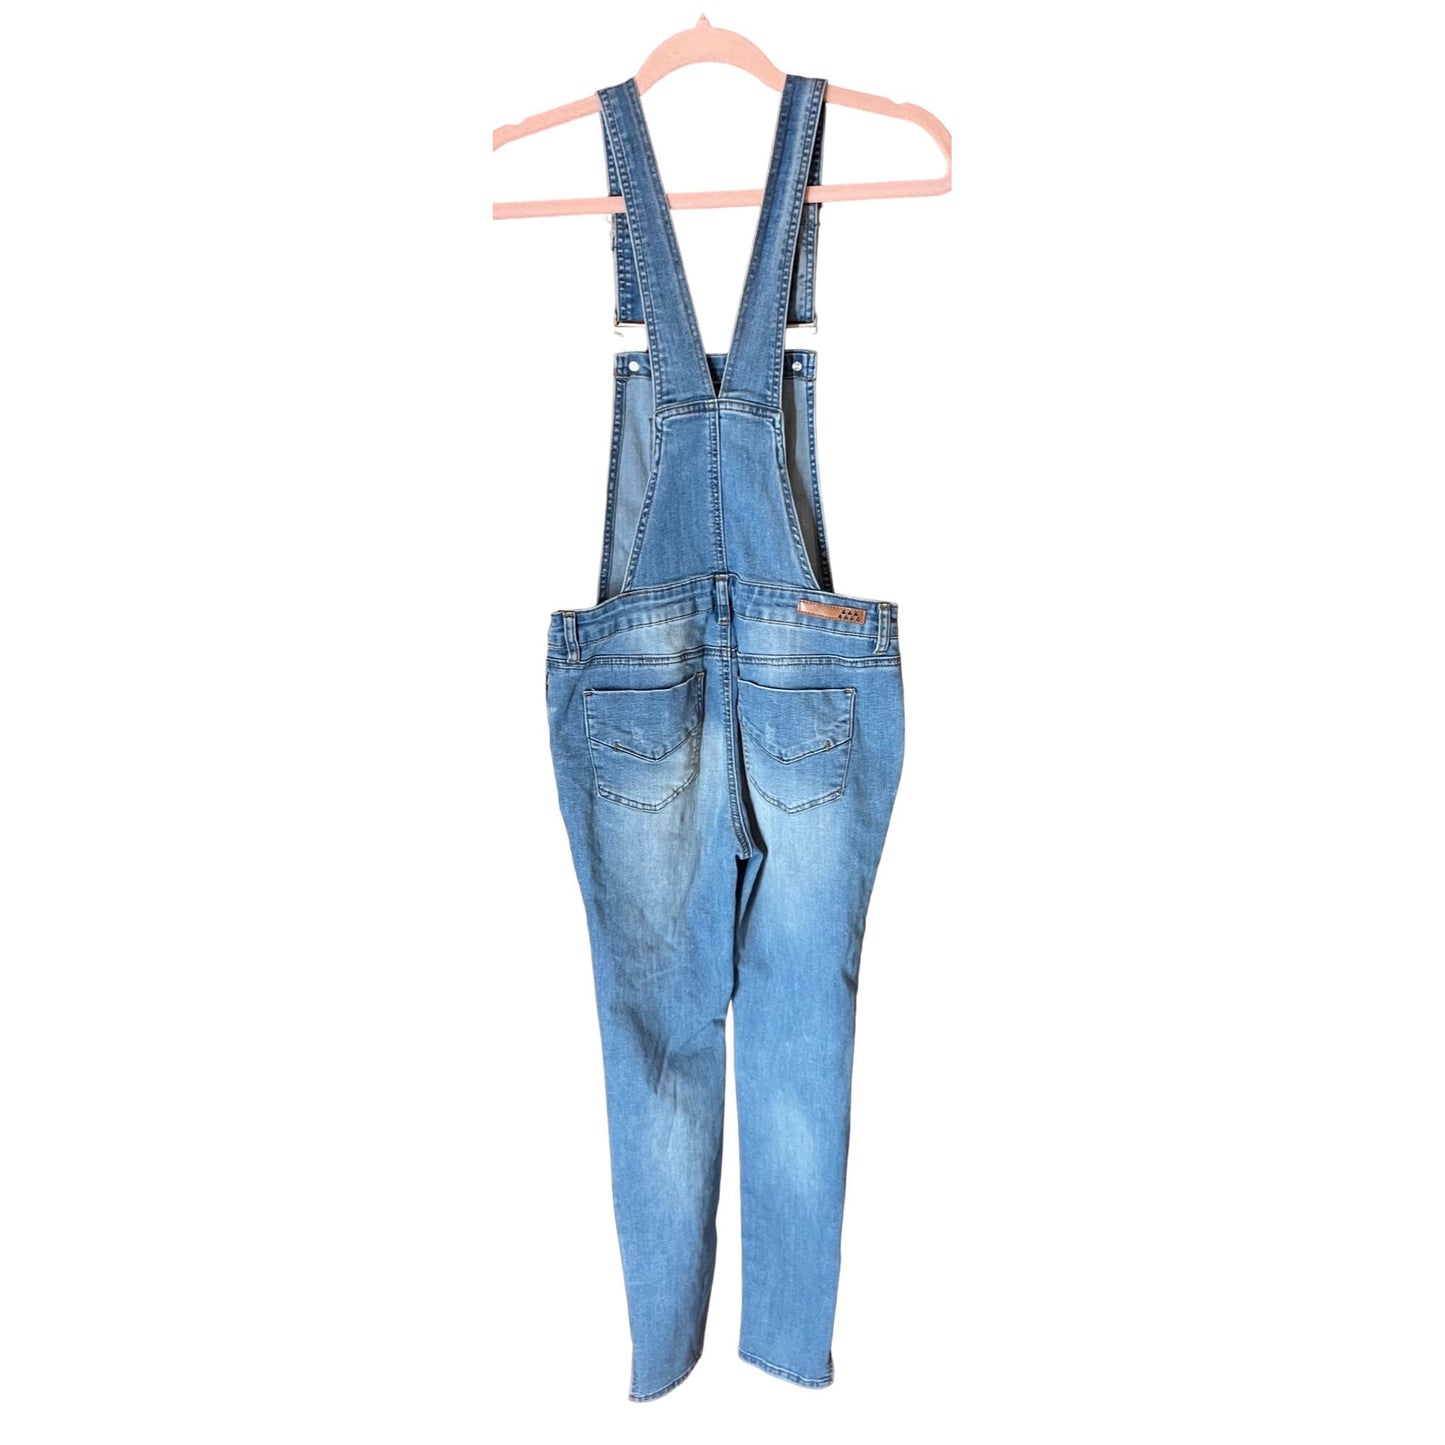 Dollhouse Women's Size 7 Distressed Blue Jean Denim Ripped Dungarees/Overalls